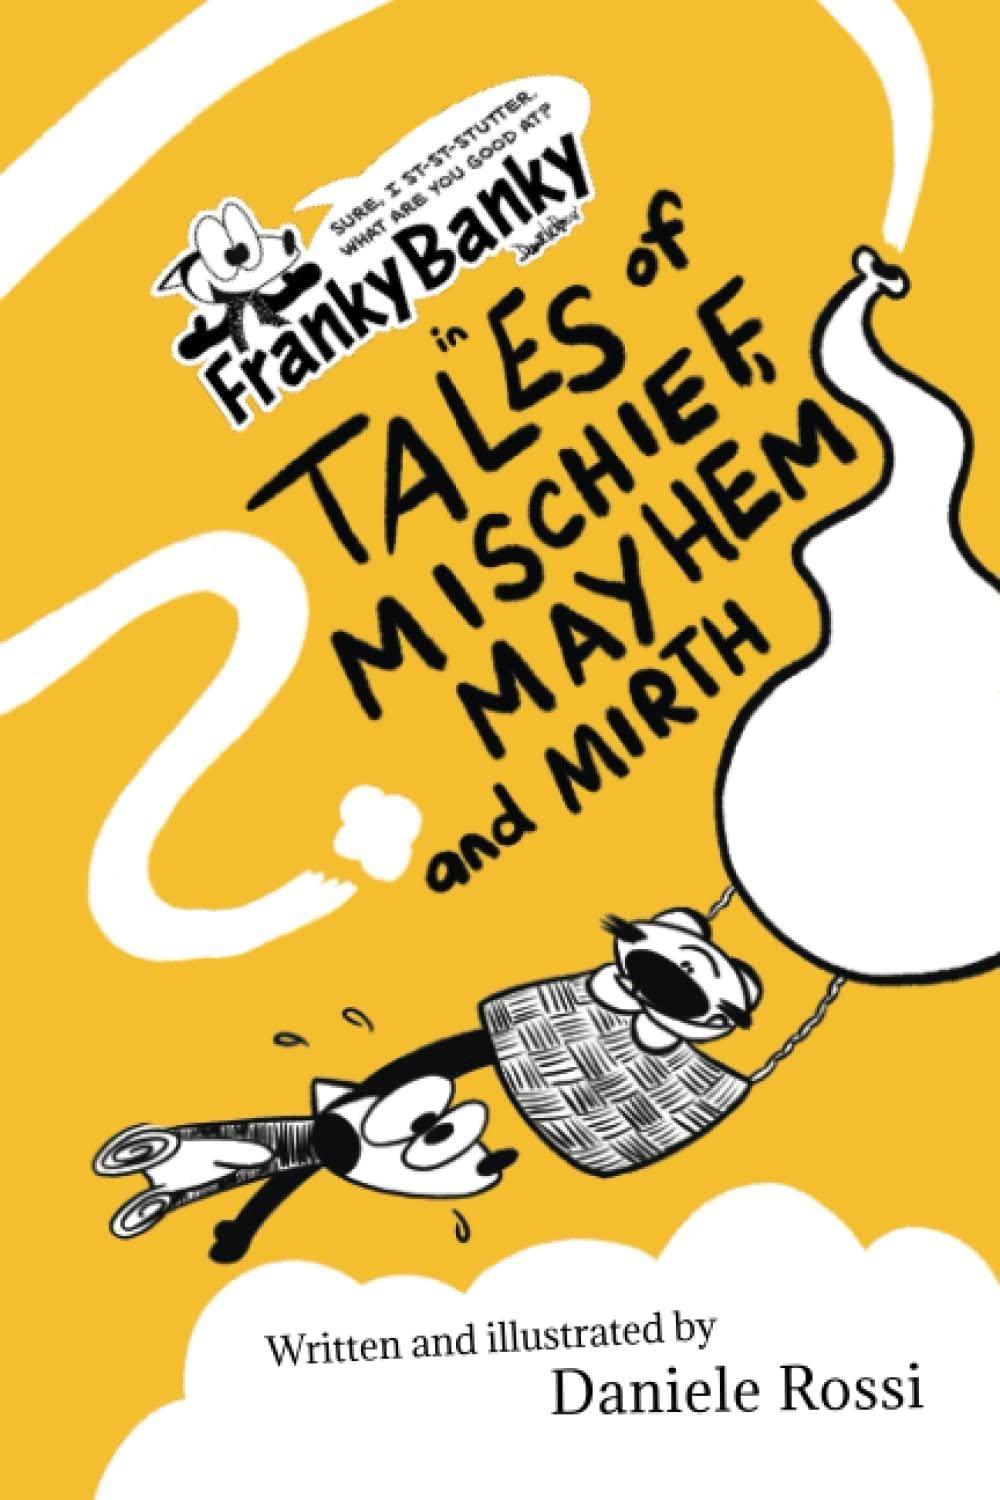 Book cover for "Tales of Mischief, Mayhem and Mirth" by daniele rossi, featuring a playful illustration of a character swinging from a rope, set against a bright yellow background.